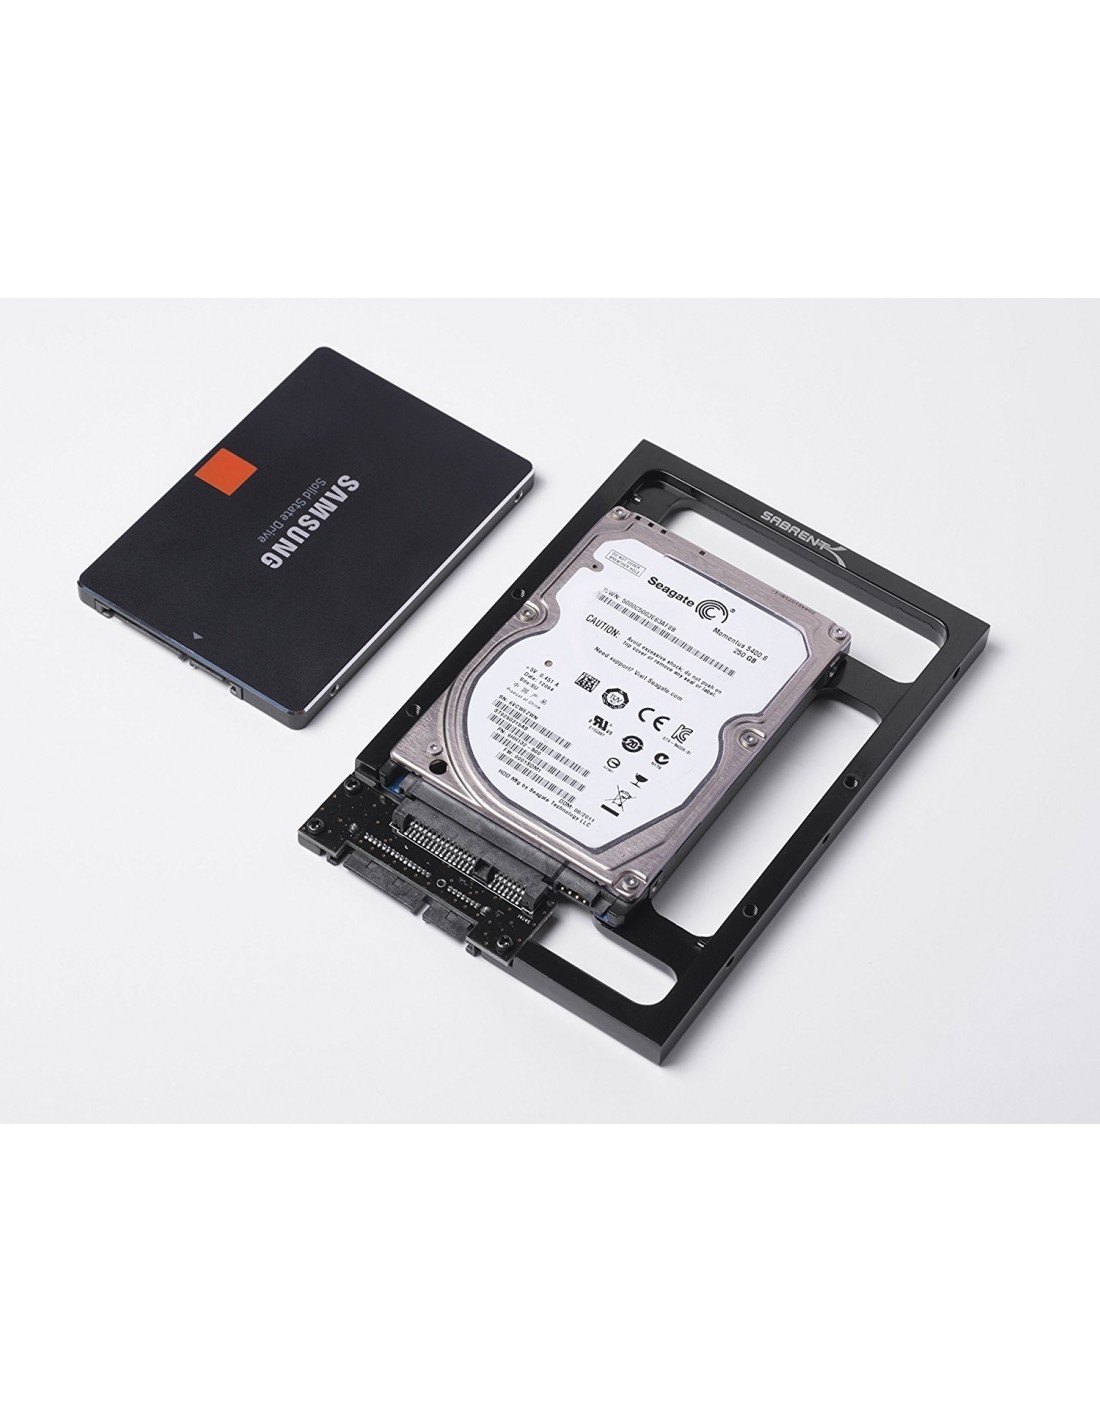 Steam ssd and hdd фото 77